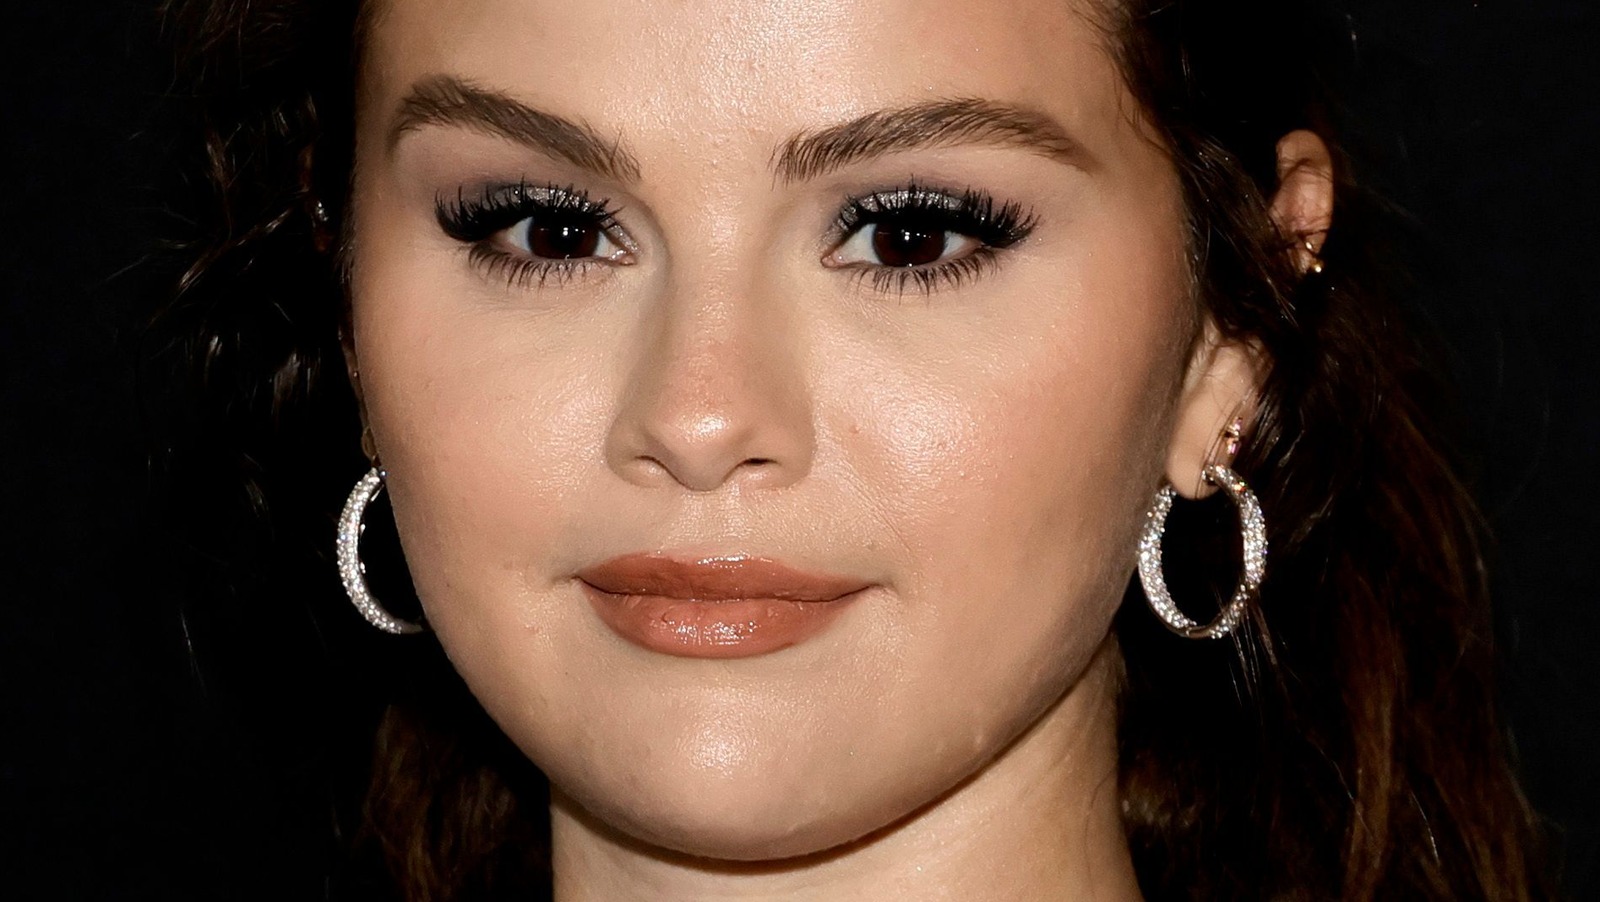 Here’s What Selena Gomez Really Looks Like Without Makeup